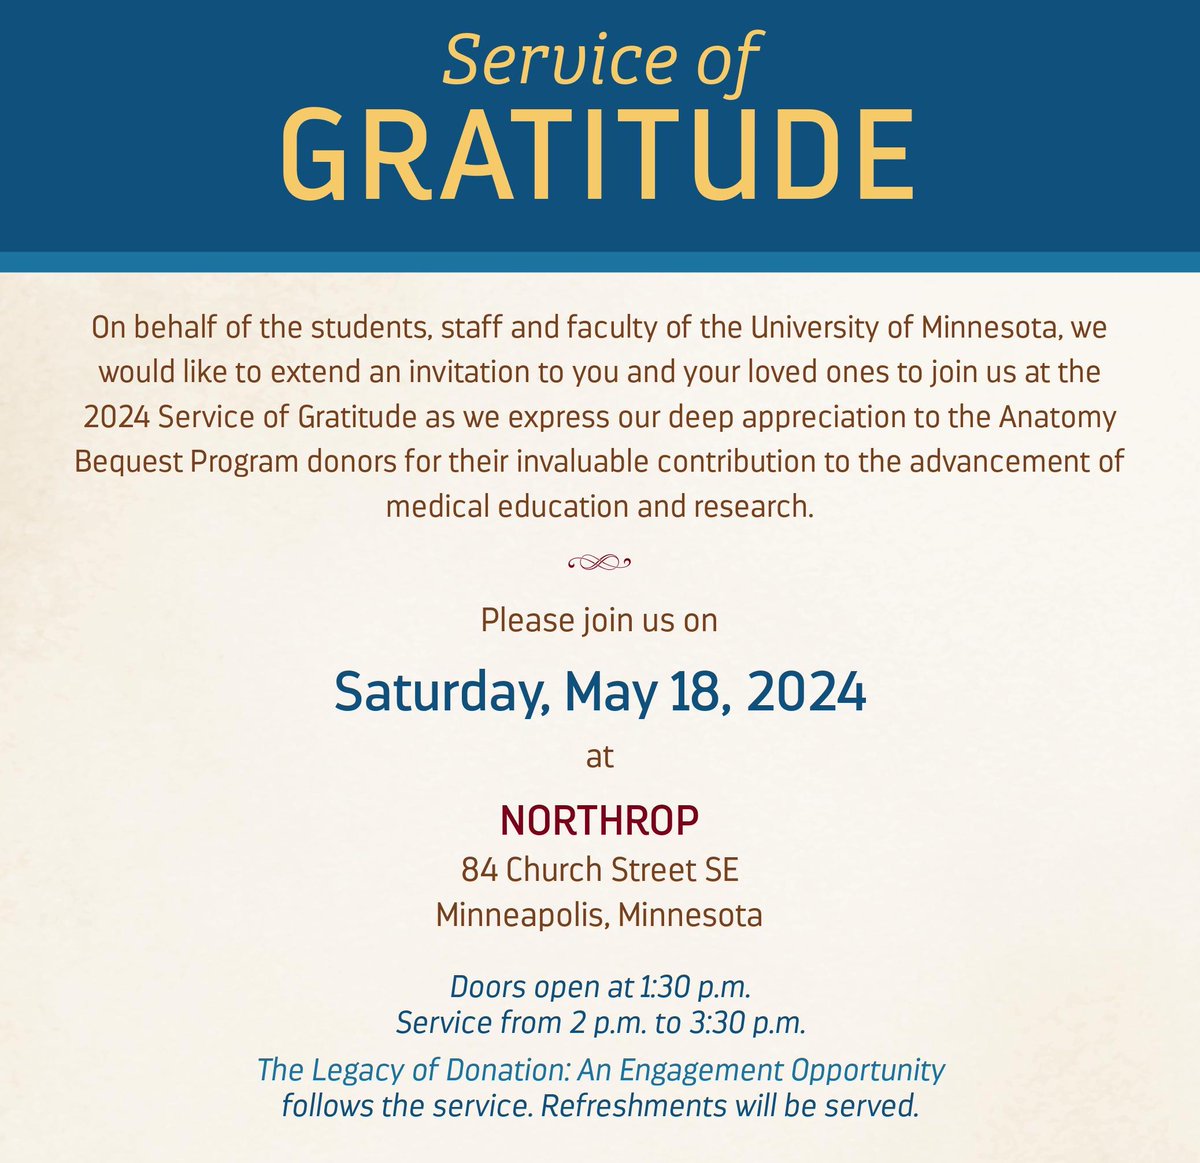 The Anatomy Bequest Program Service of Gratitude is a chance for us to express our deep appreciation to the donors for their invaluable contribution to the advancement of medical education and research. 📆 May 18 from 2-3:30 p.m. 📍 Northrop 🔗 bit.ly/4dq2y4k.